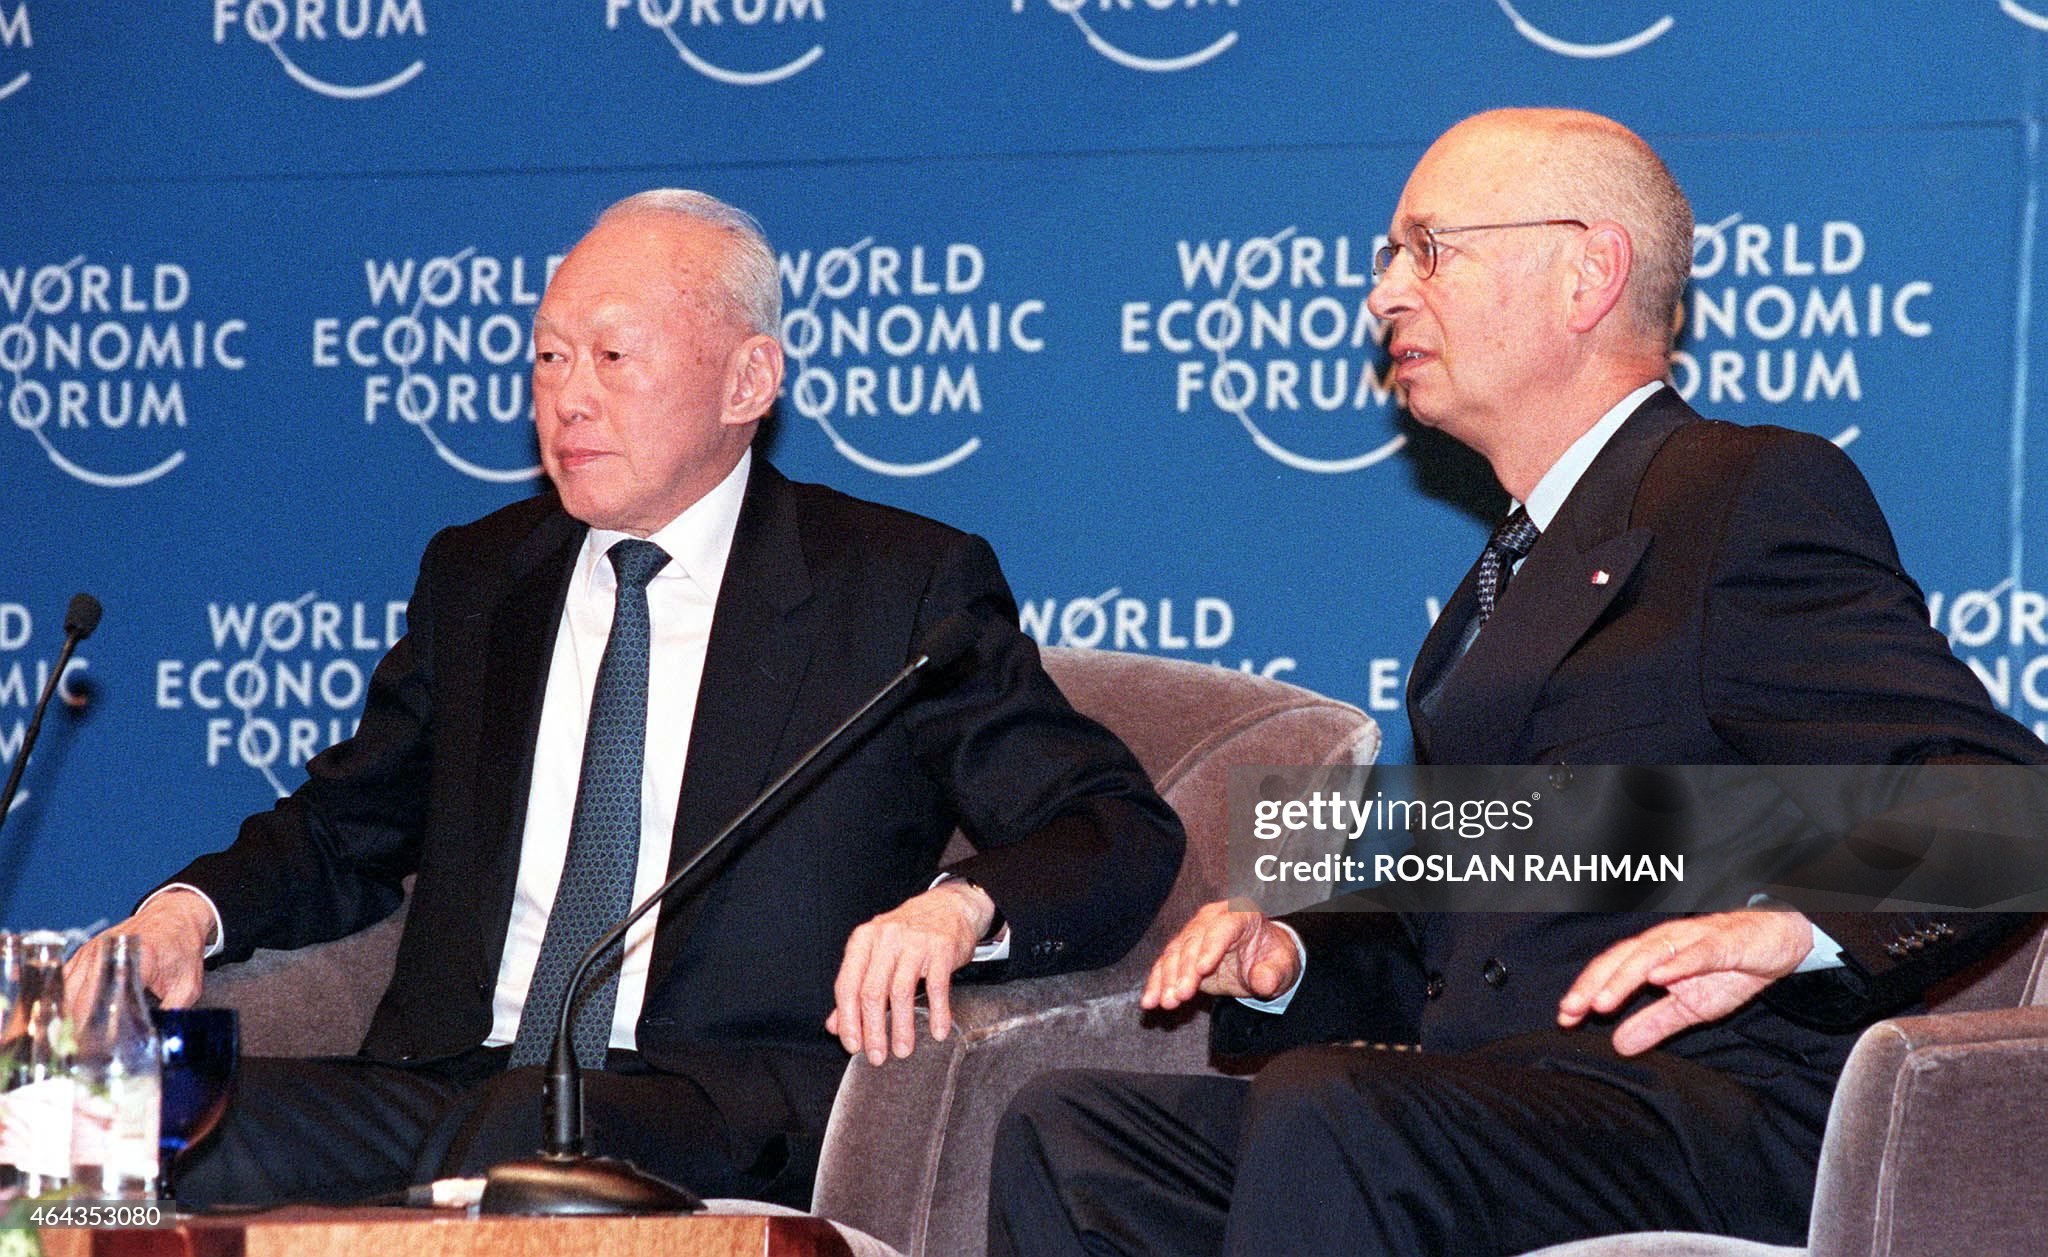 singapore-senior-minister-lee-kuan-yew-with-klaus-schwab-founder-and-president-of-the-world.jpg